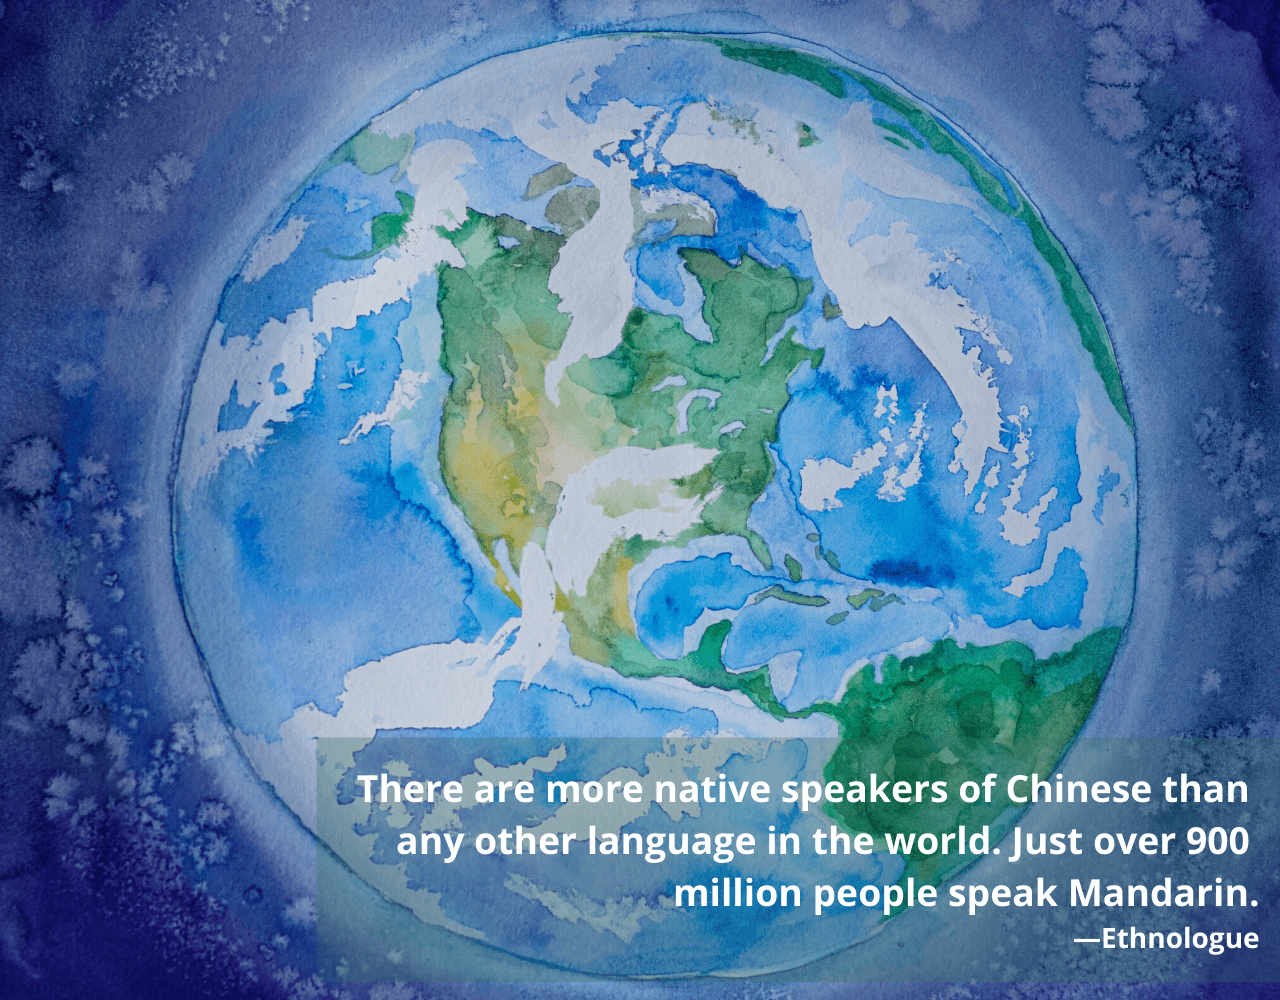 Chinese is the most natively-spoken language in the world